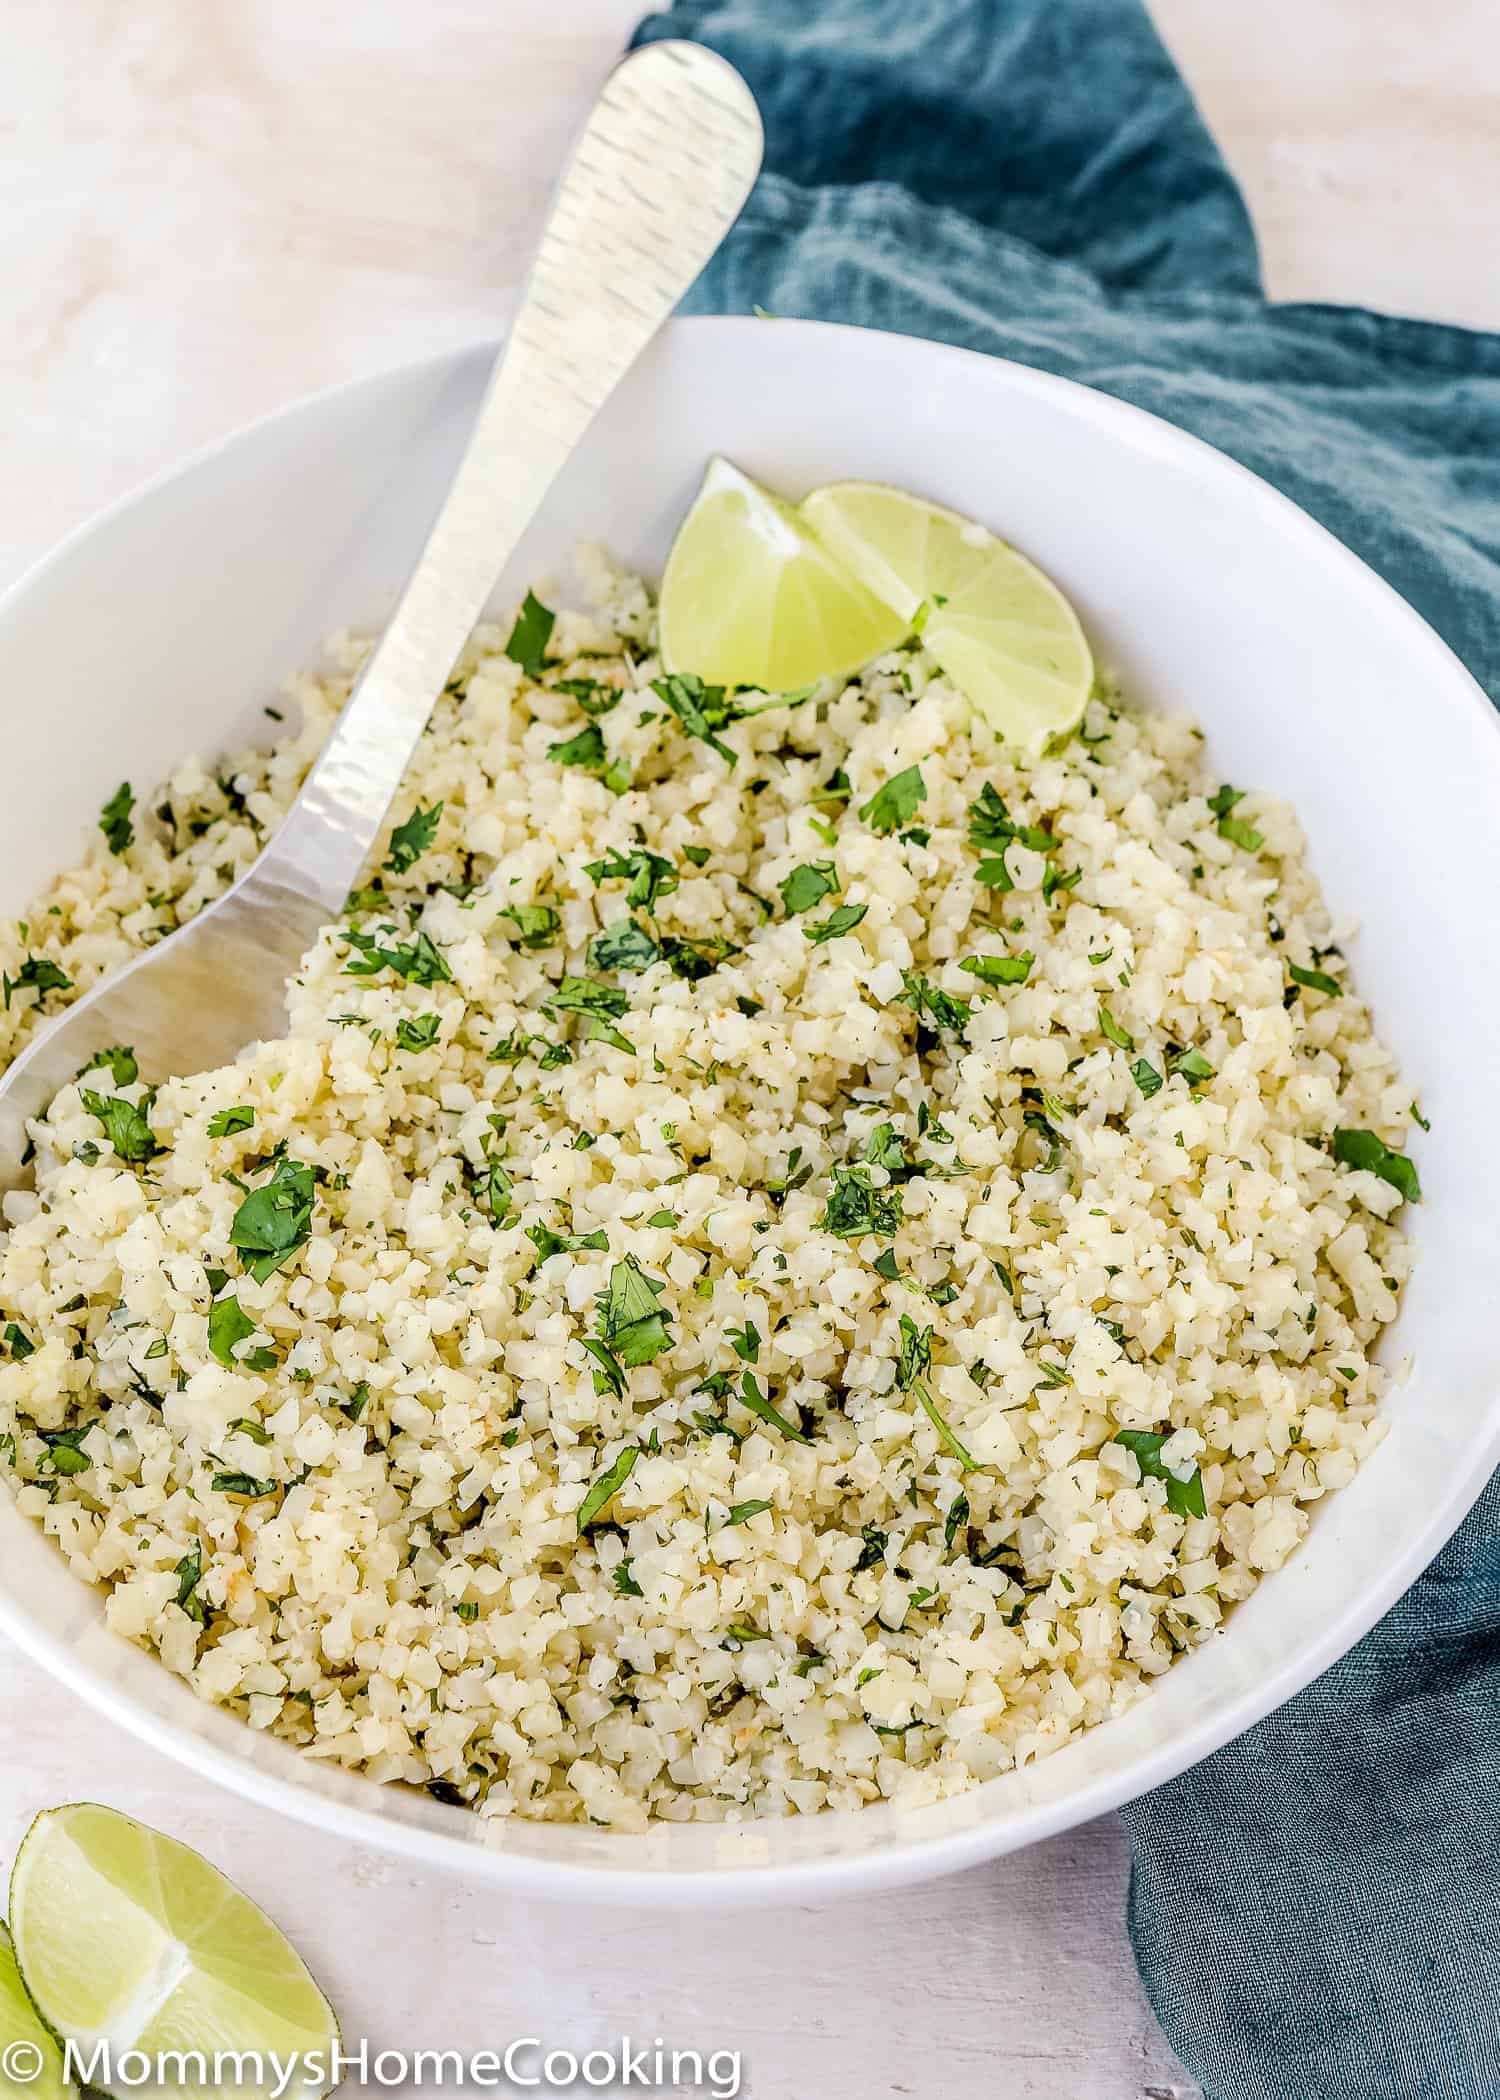 This Easy Cilantro Lime Cauliflower Rice is slightly crispy on the outside, tender on the inside and super flavorful. It’s the perfect side dish to accompany any meal, anytime. Low Carb. Paleo. Keto and Whole 30 friendly. https://mommyshomecooking.com